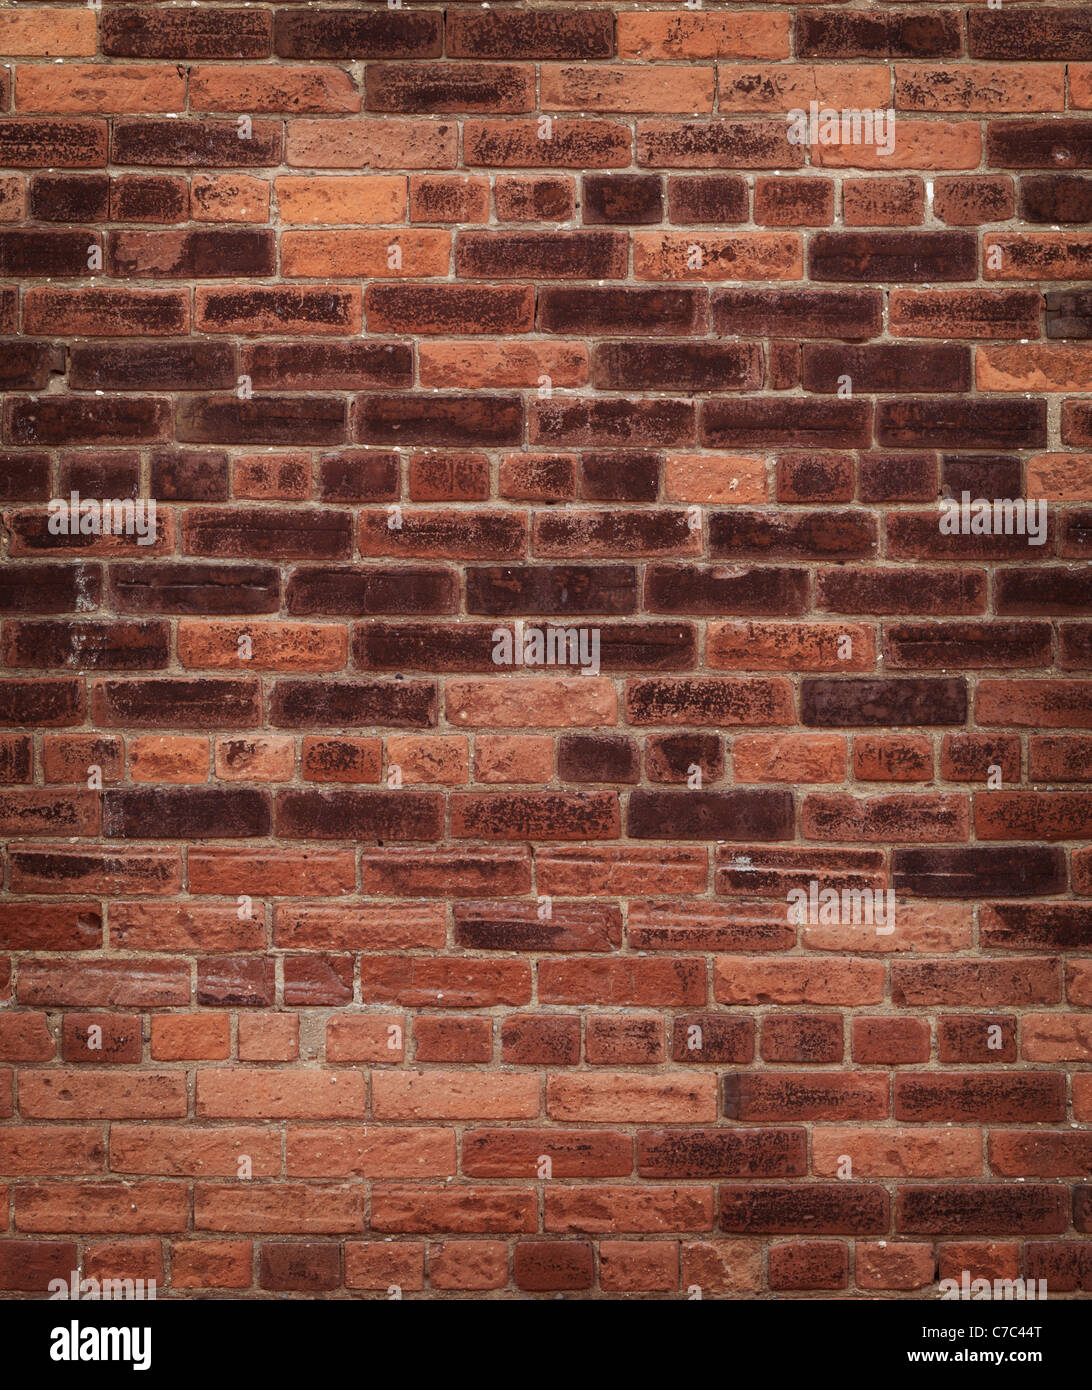 Old red brick wall texture background. High resolution high quality photo. Stock Photo